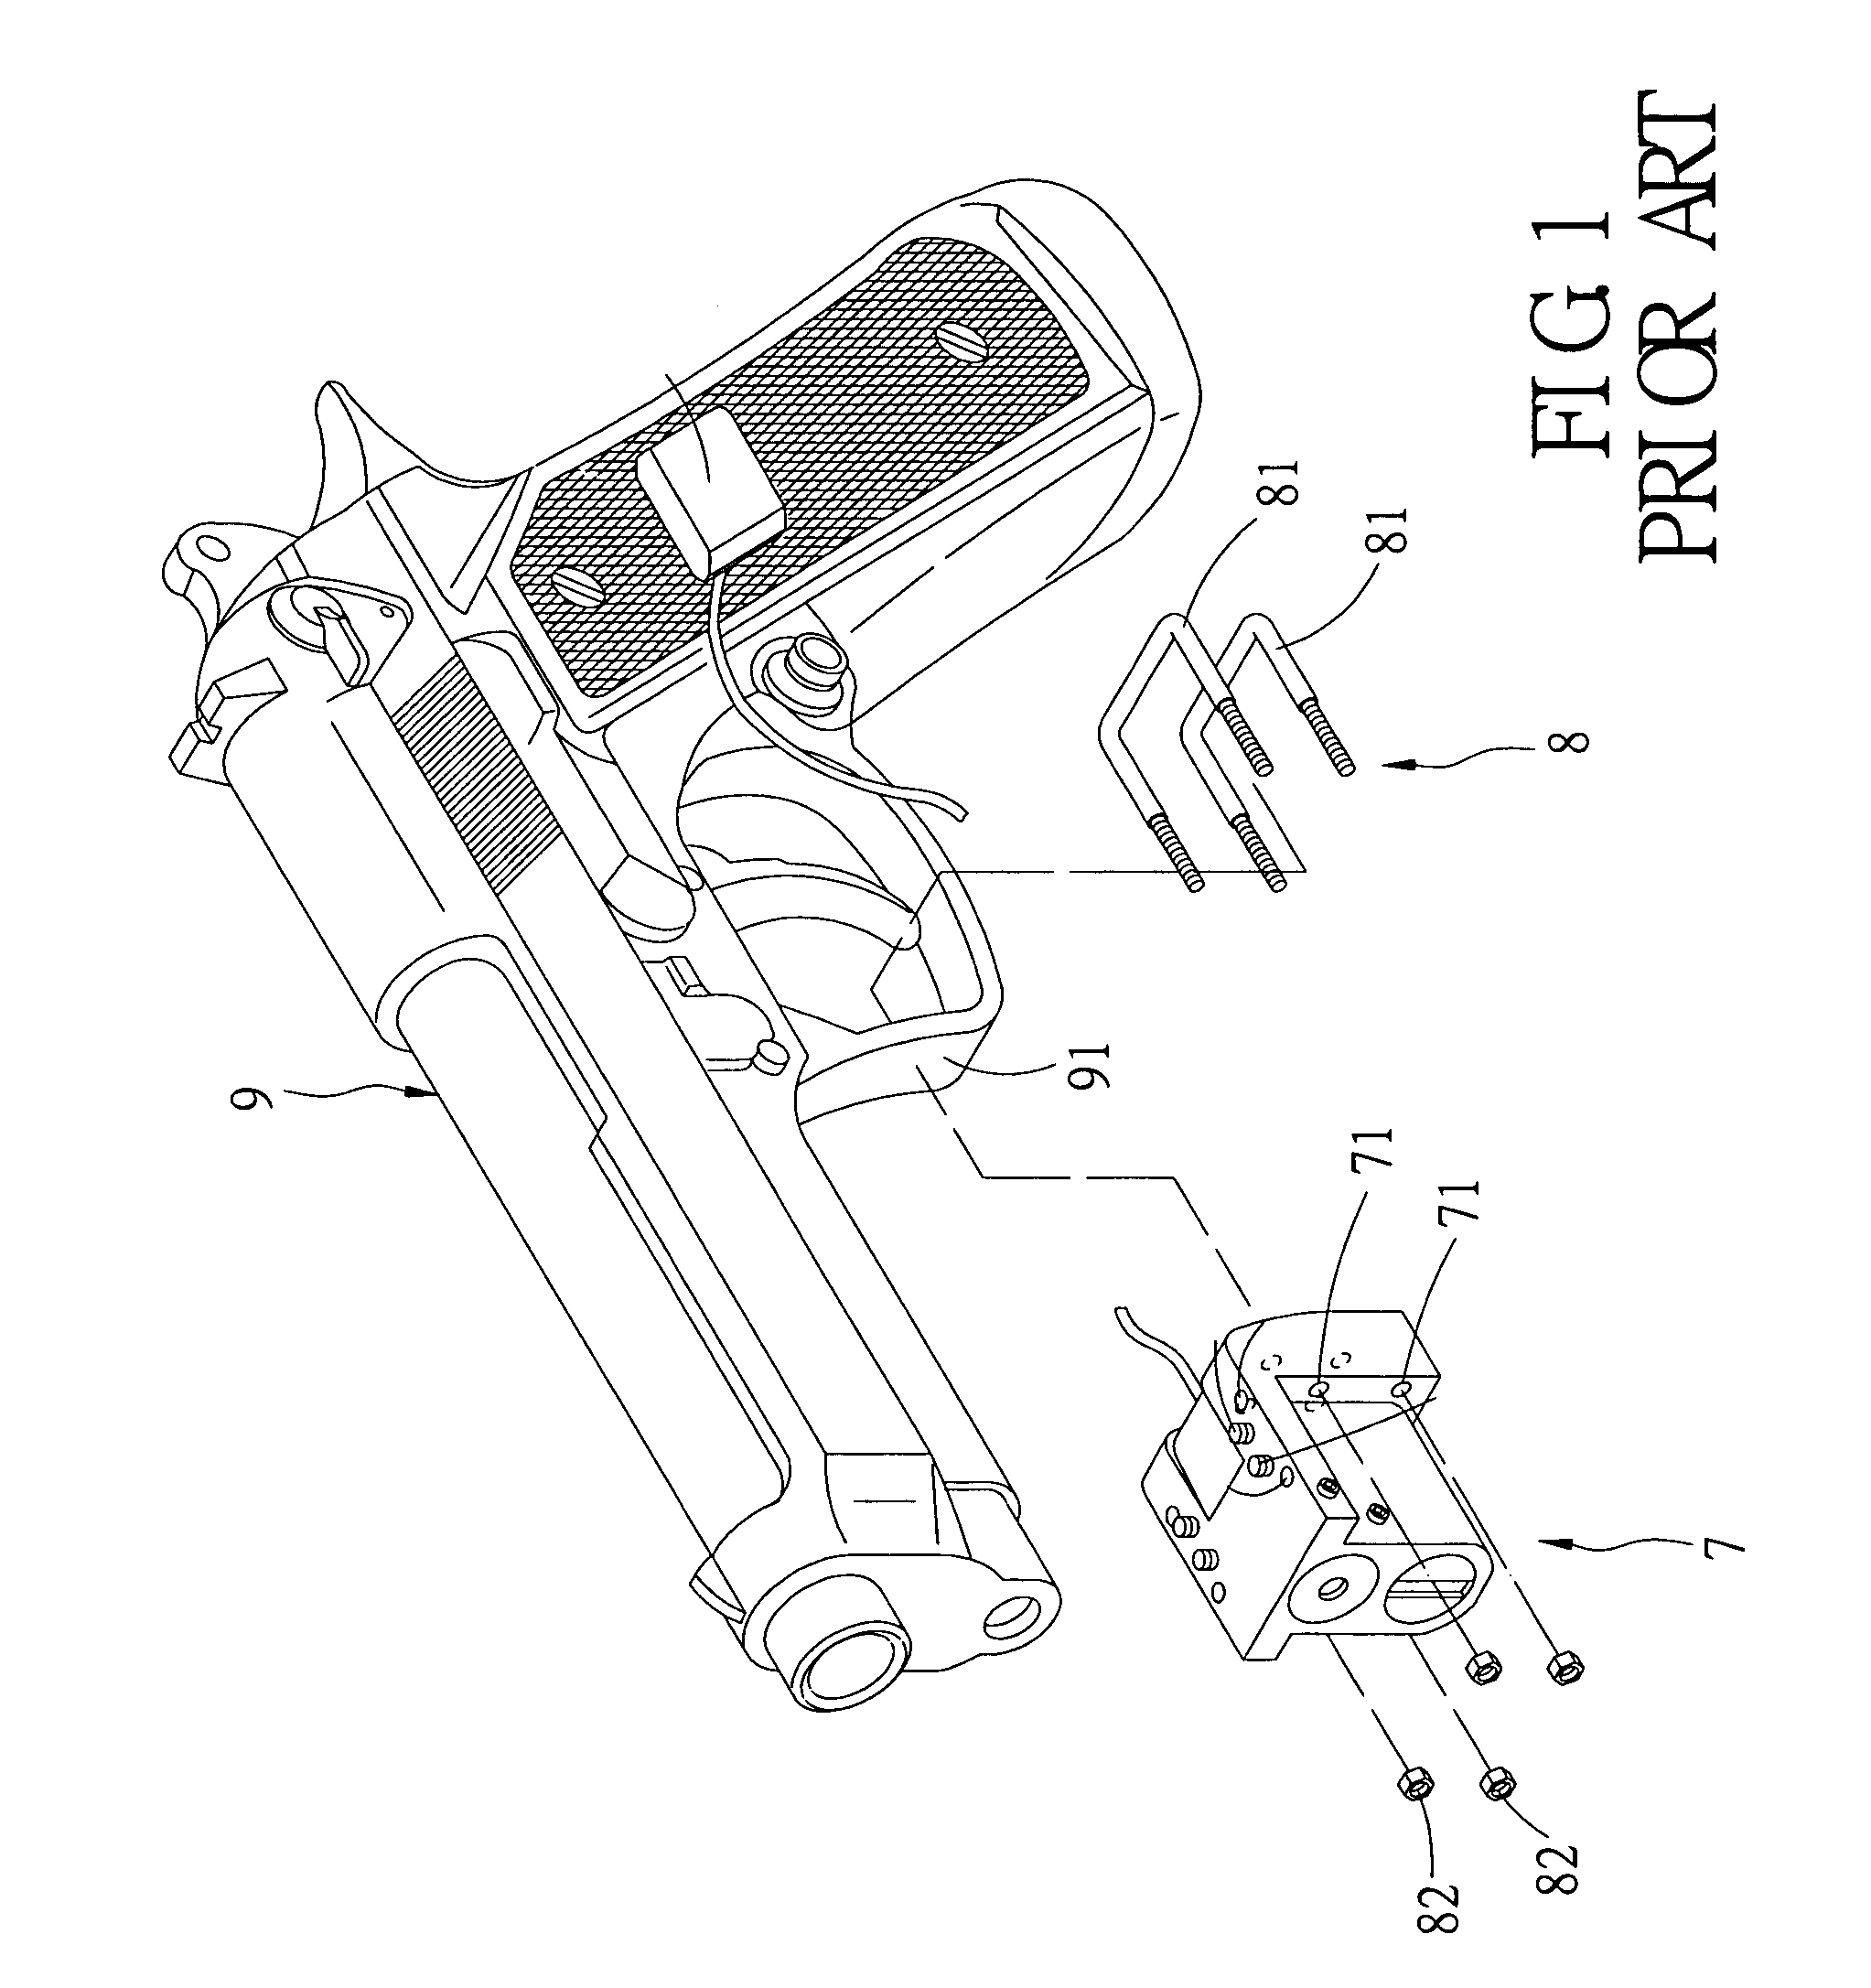 Gun barrel and trigger flashlight and/or laser mount structure